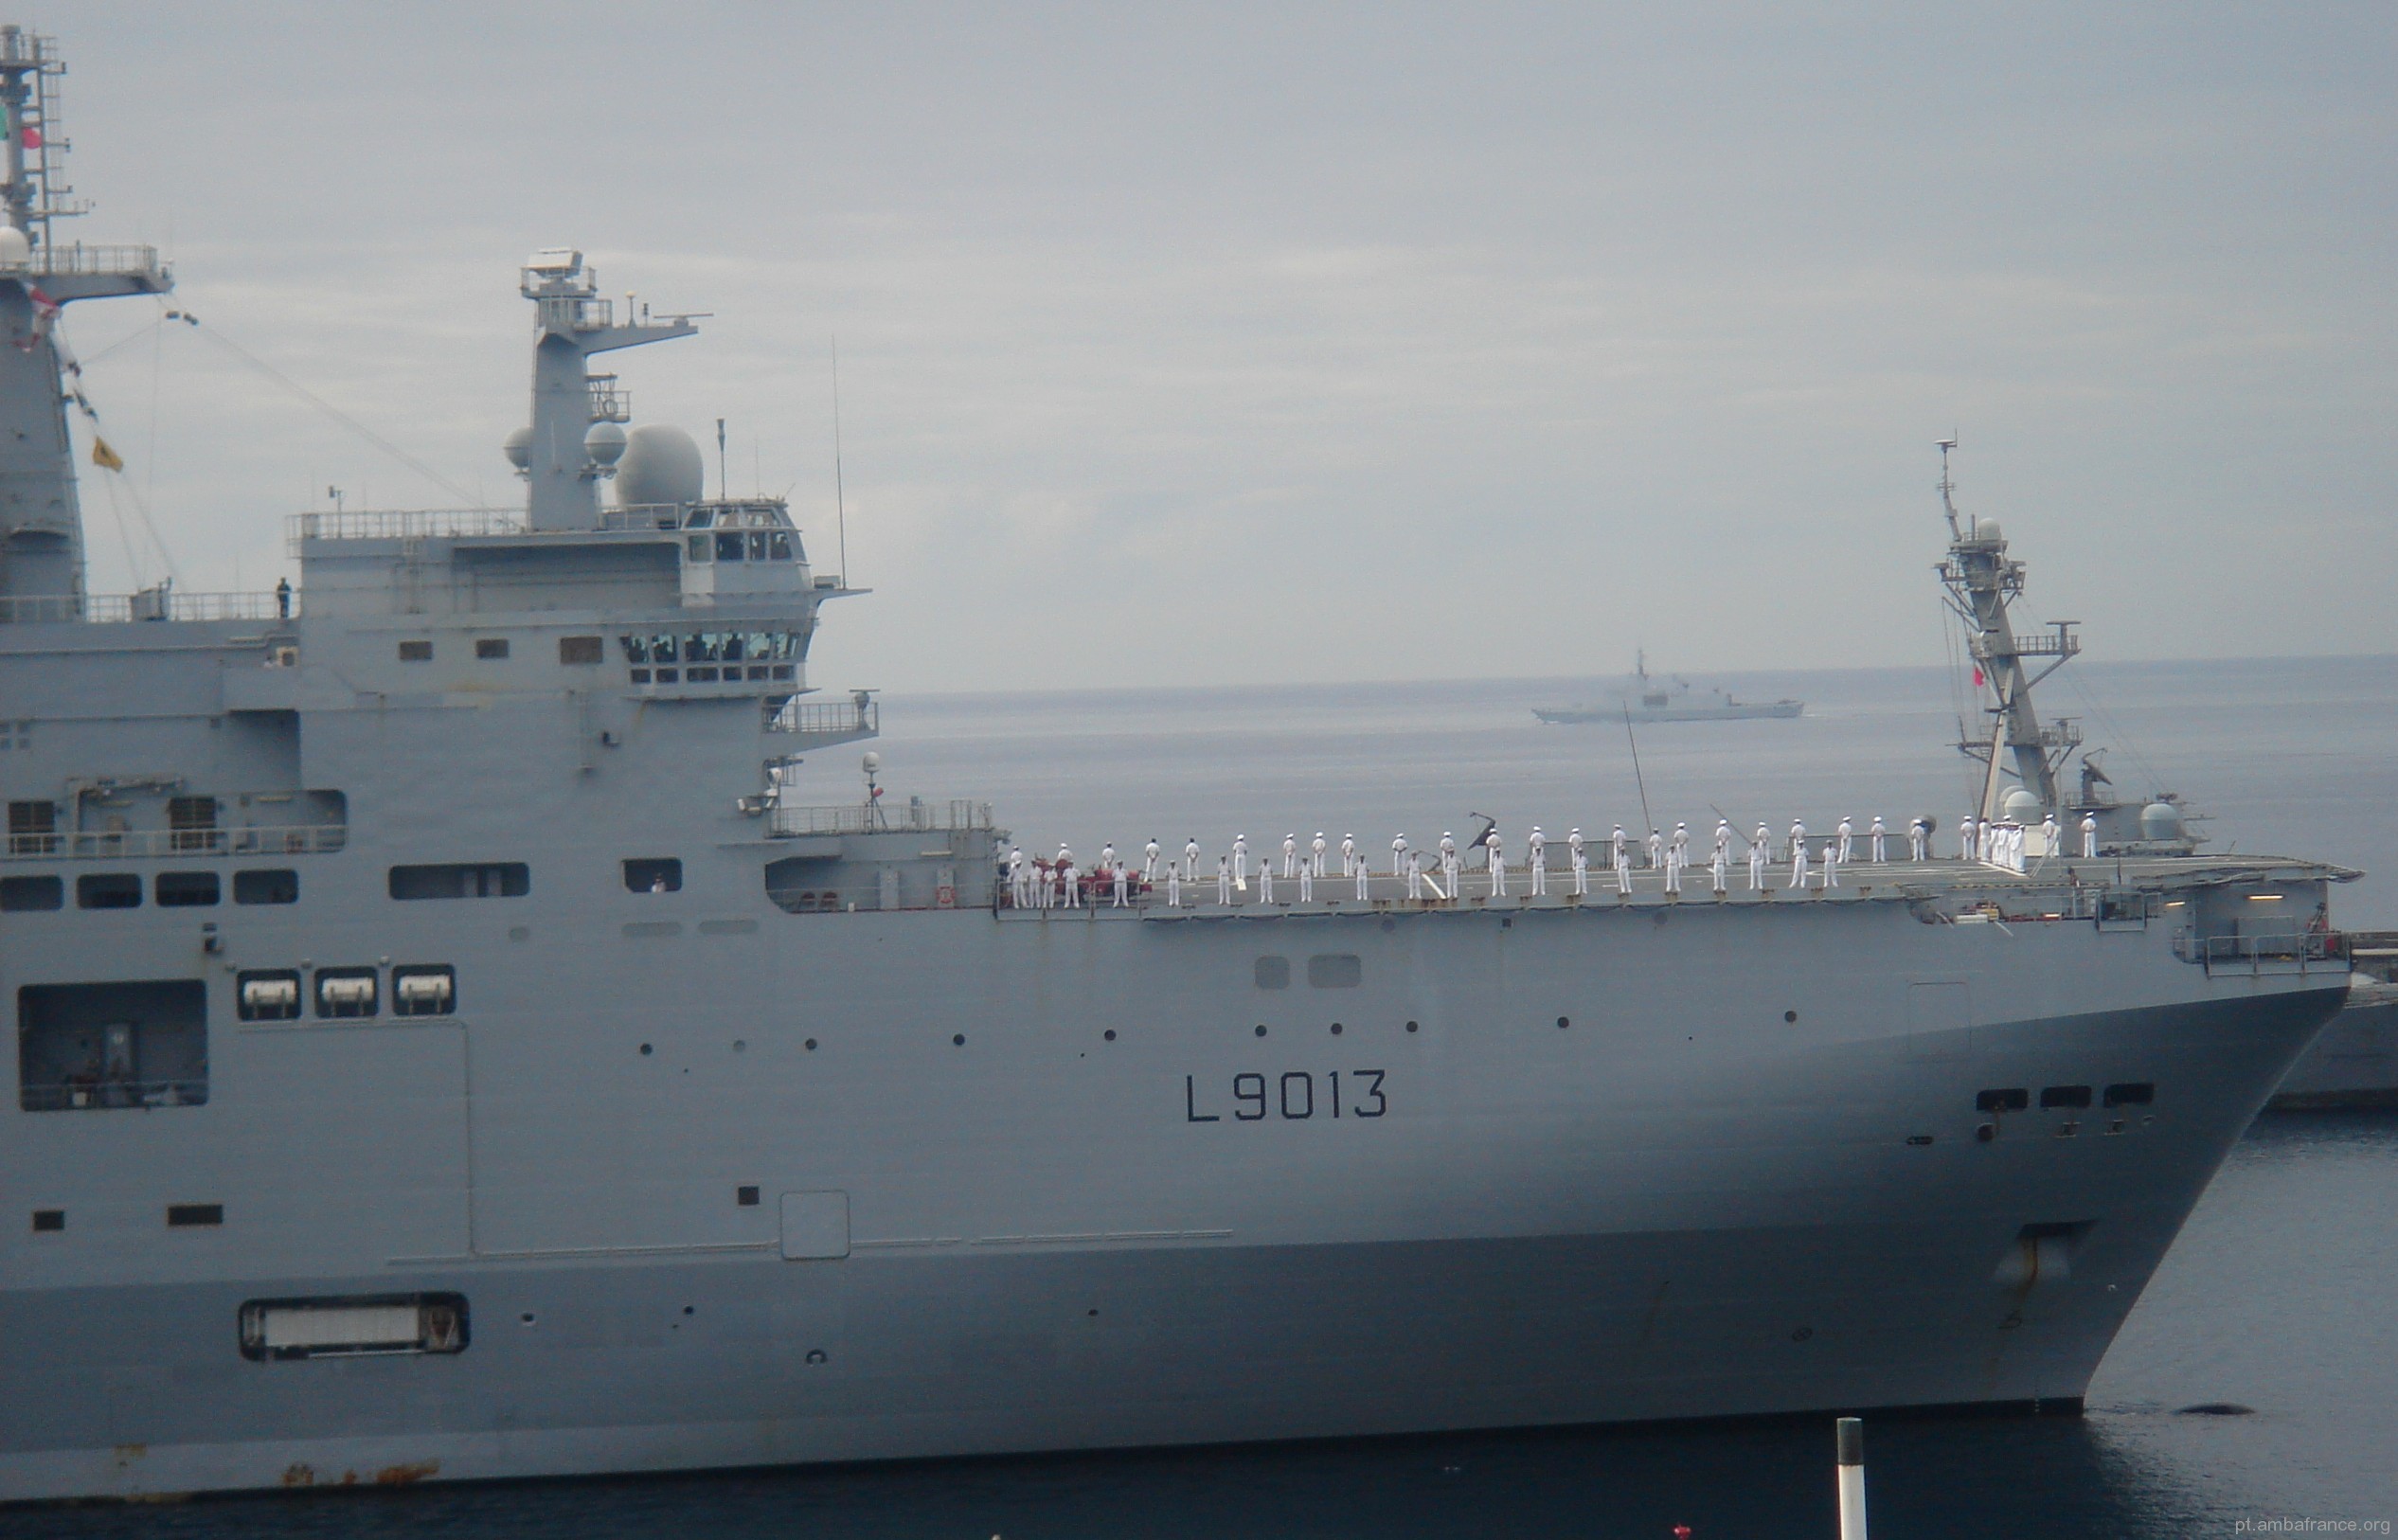 l-9013 fs mistral amphibious assault command ship french navy marine nationale 39